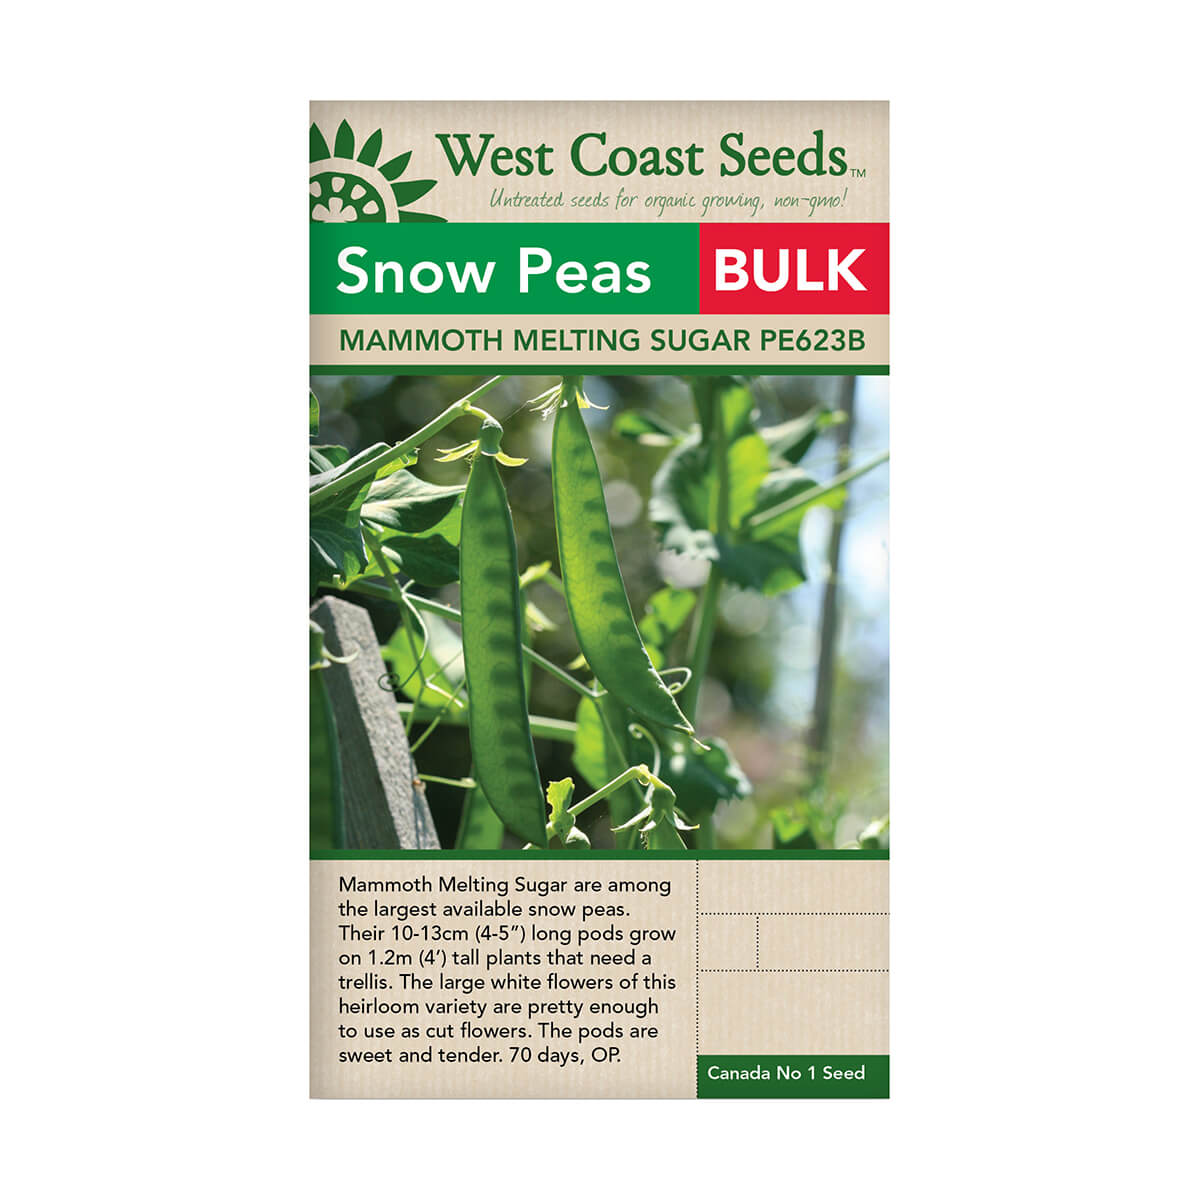 Mammoth Melting Sugar Snow Pea Seeds - approx. 262 seeds